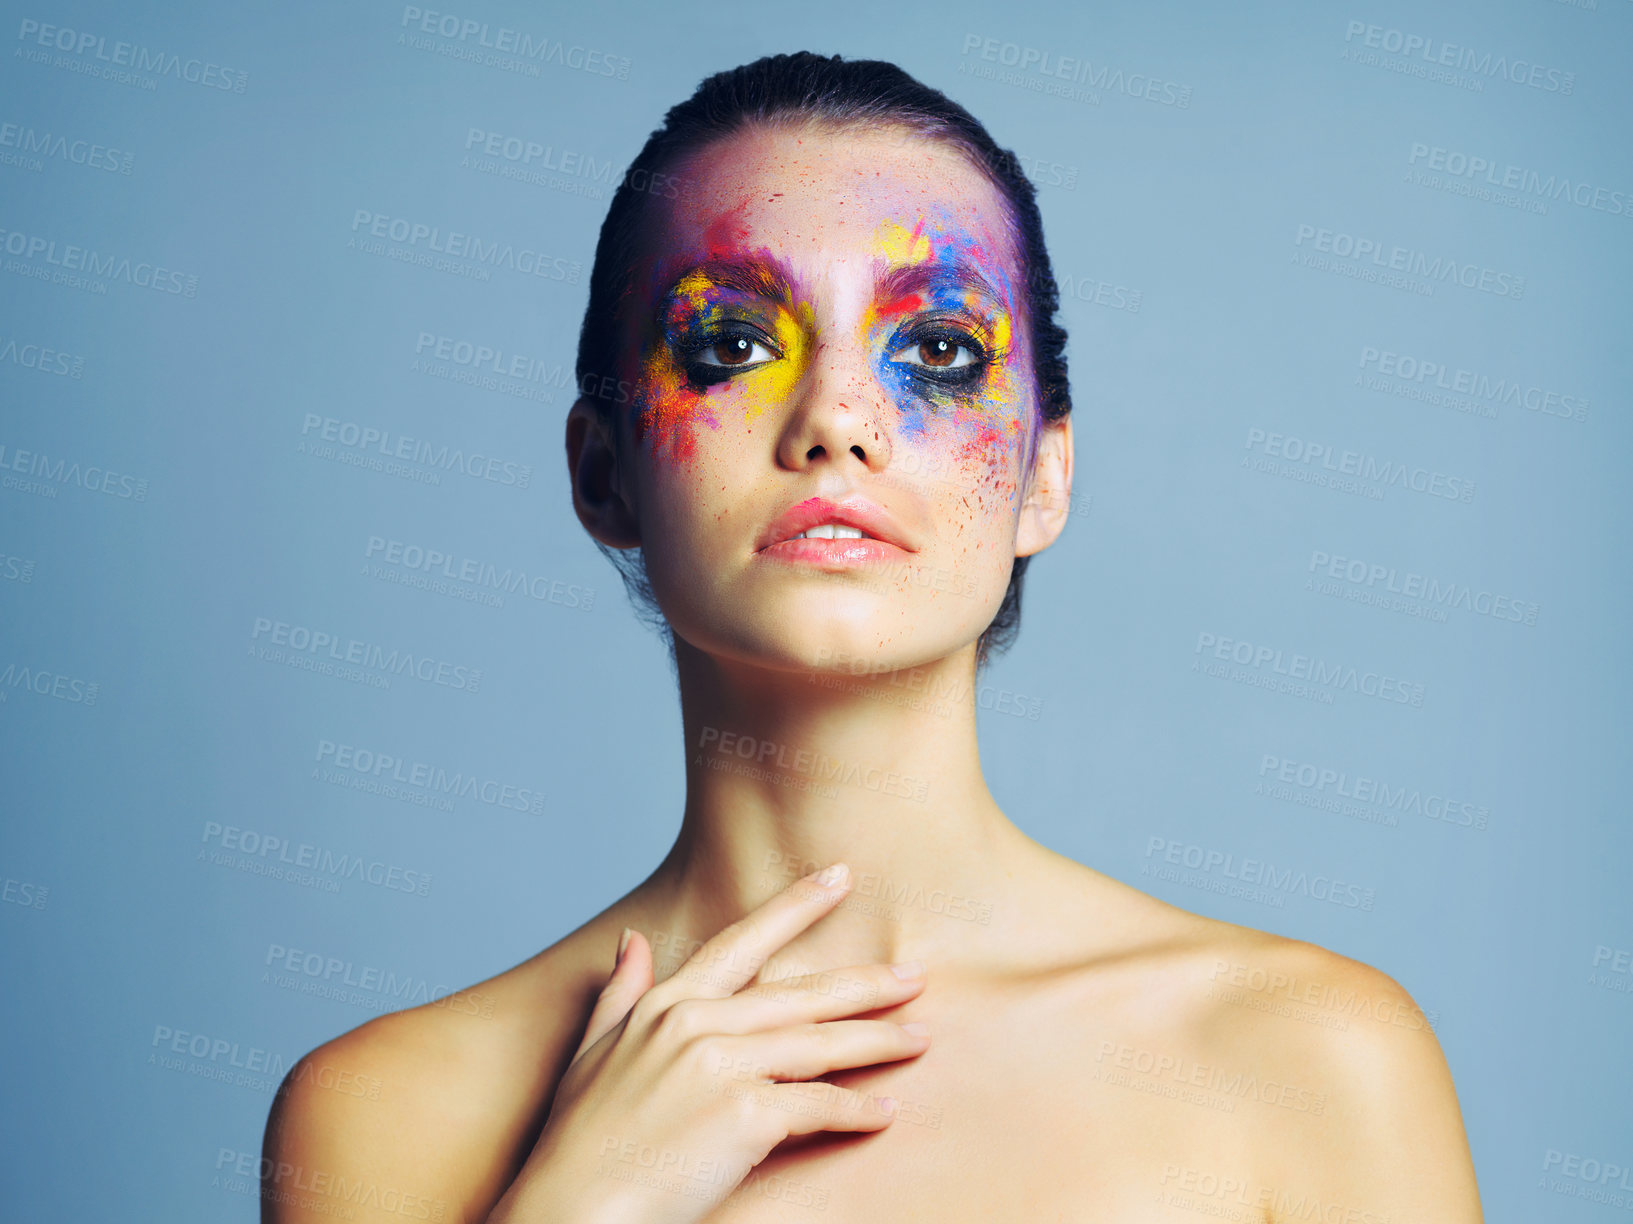 Buy stock photo Studio shot of an attractive young woman with brightly colored makeup against a blue background